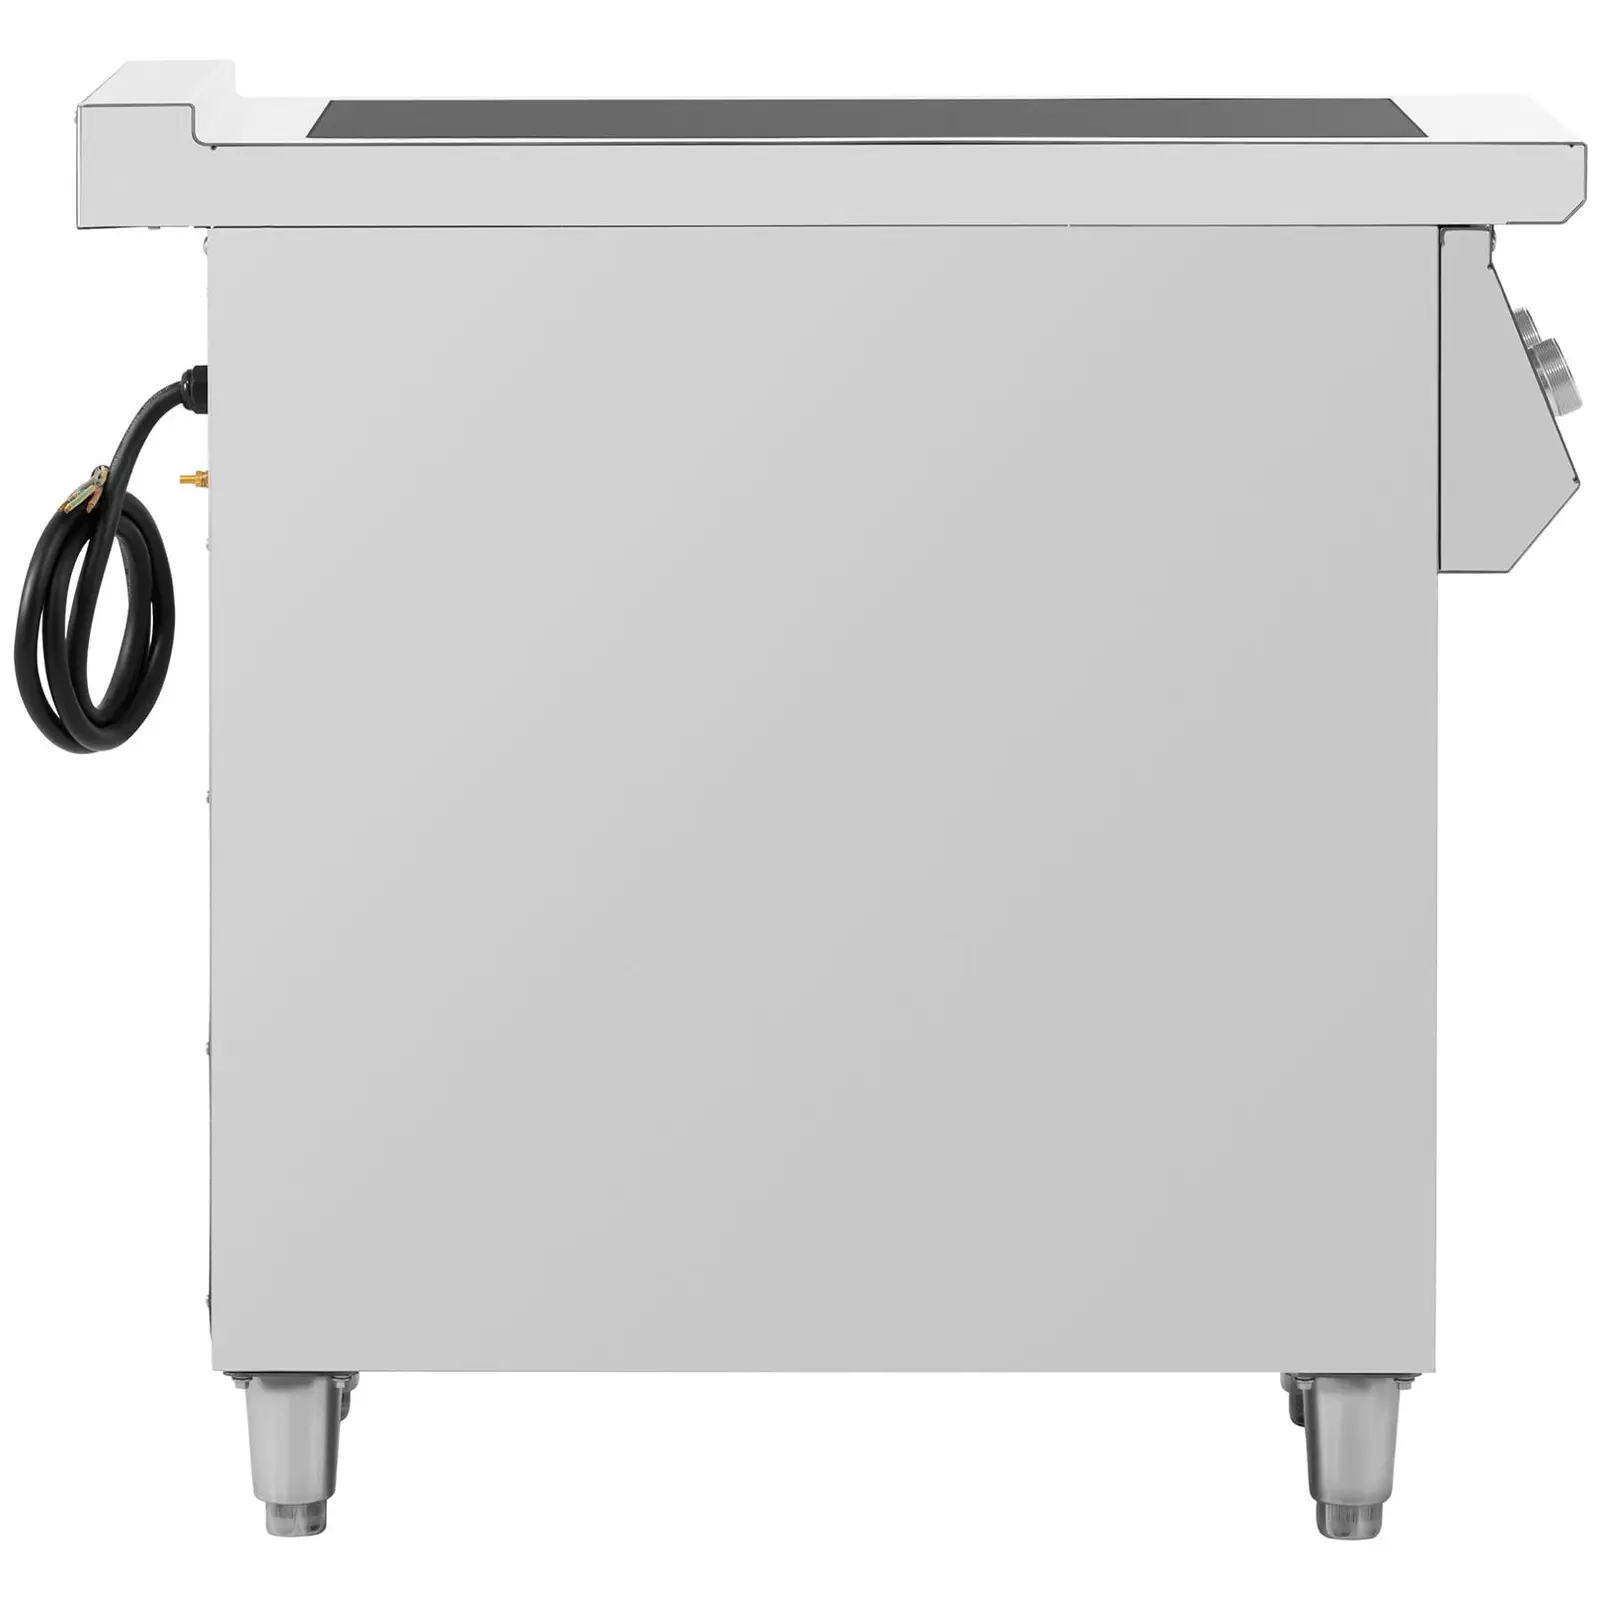 Factory second Induction Cooker - 8500 W - 2 cooking surfaces - 260 °C - Storage space - Royal Catering